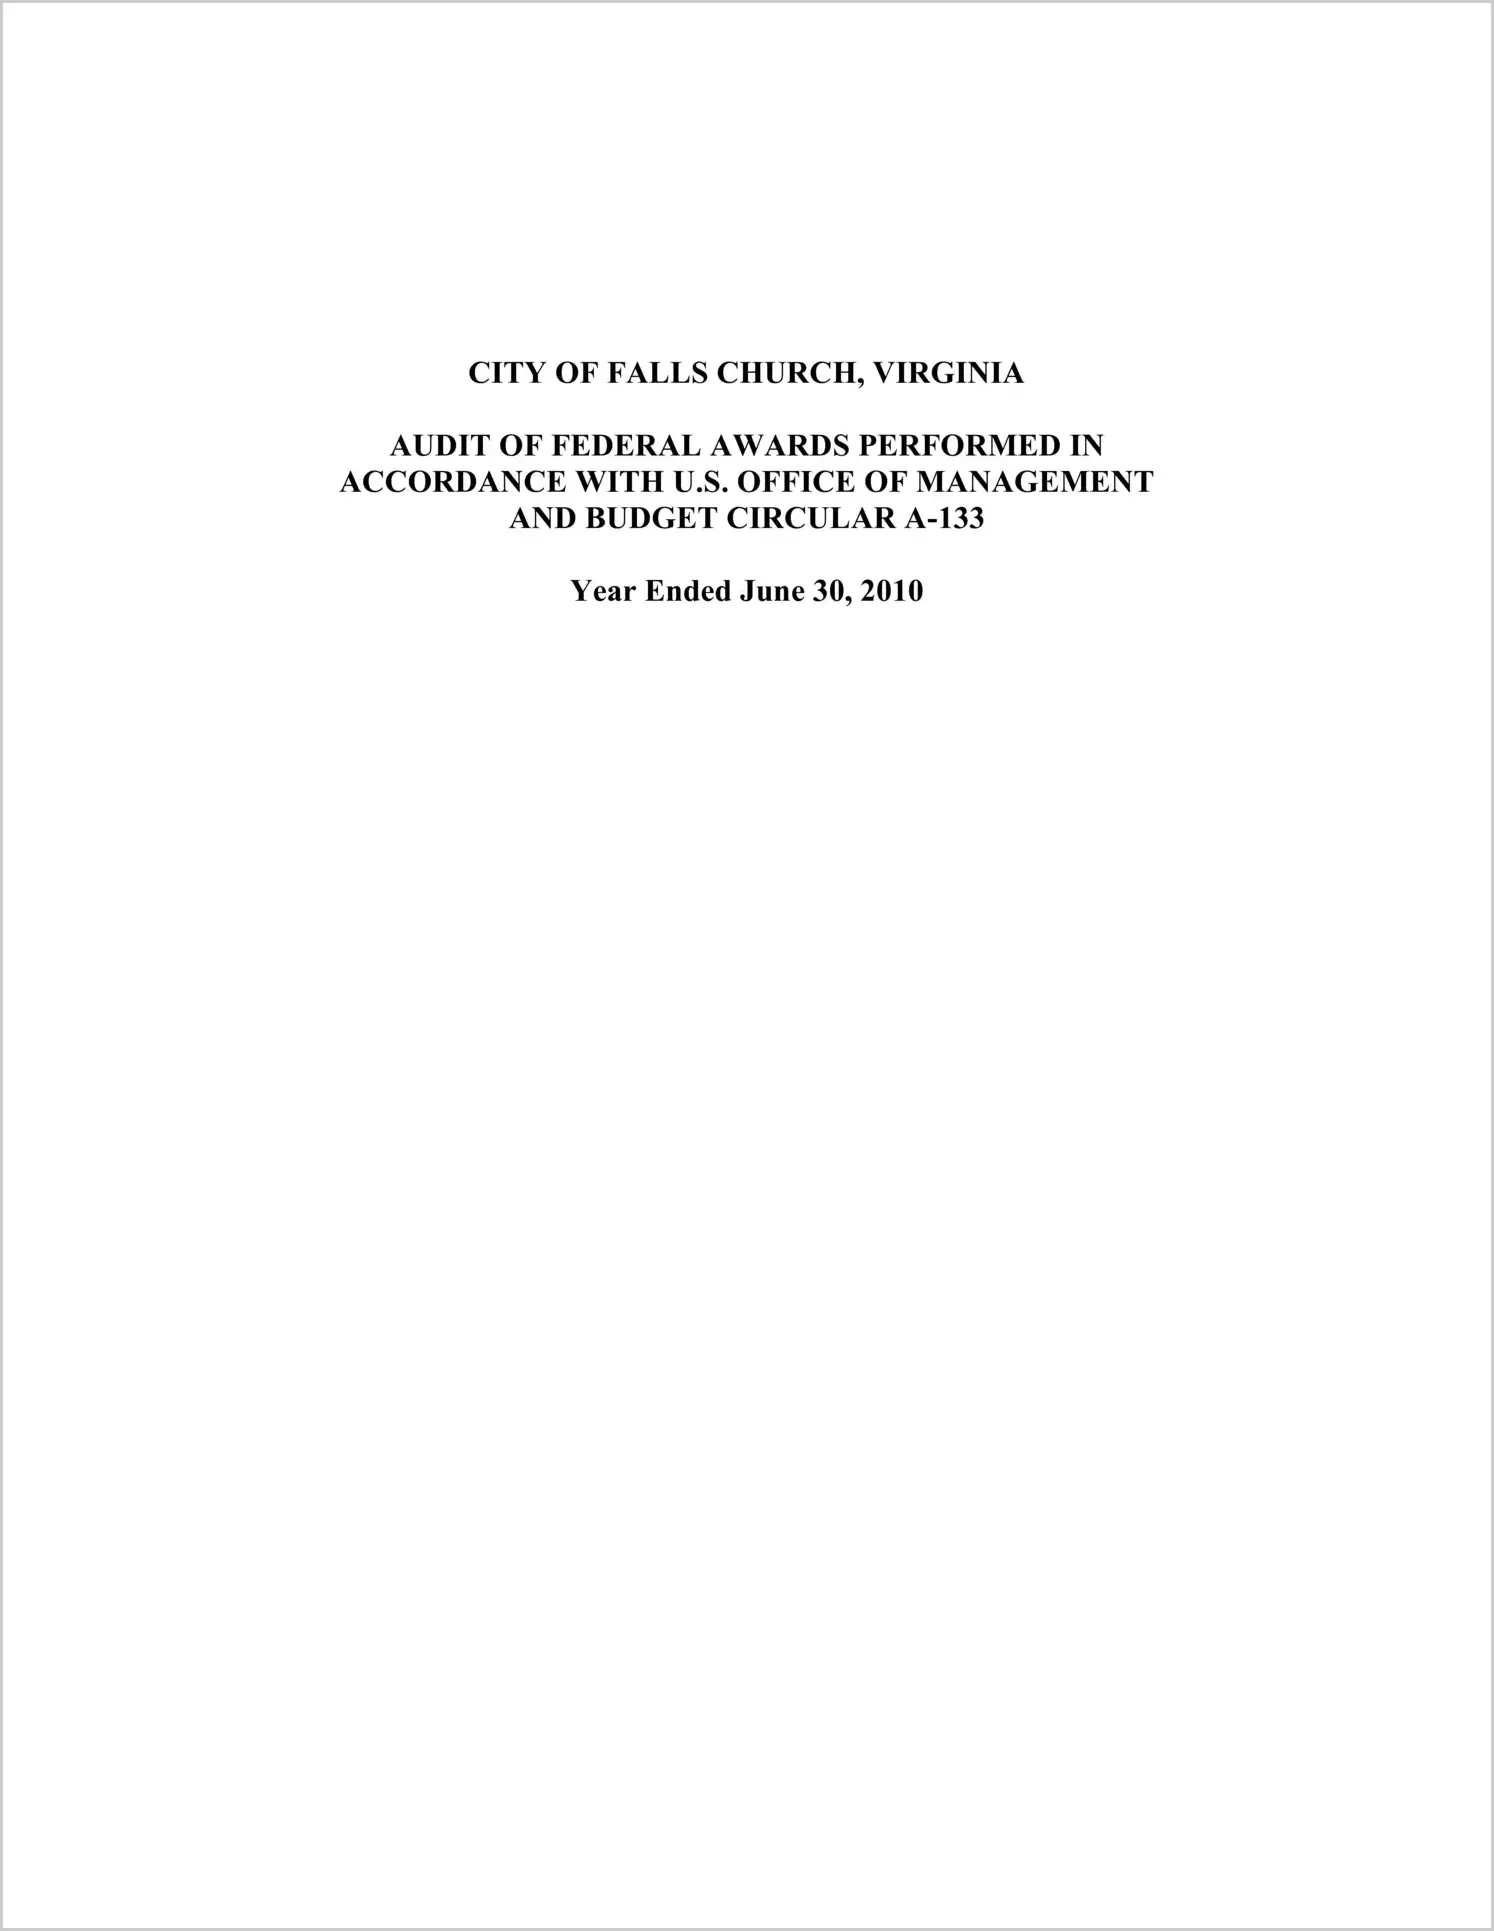 2010 Internal Control and Compliance Report for City of Falls Church